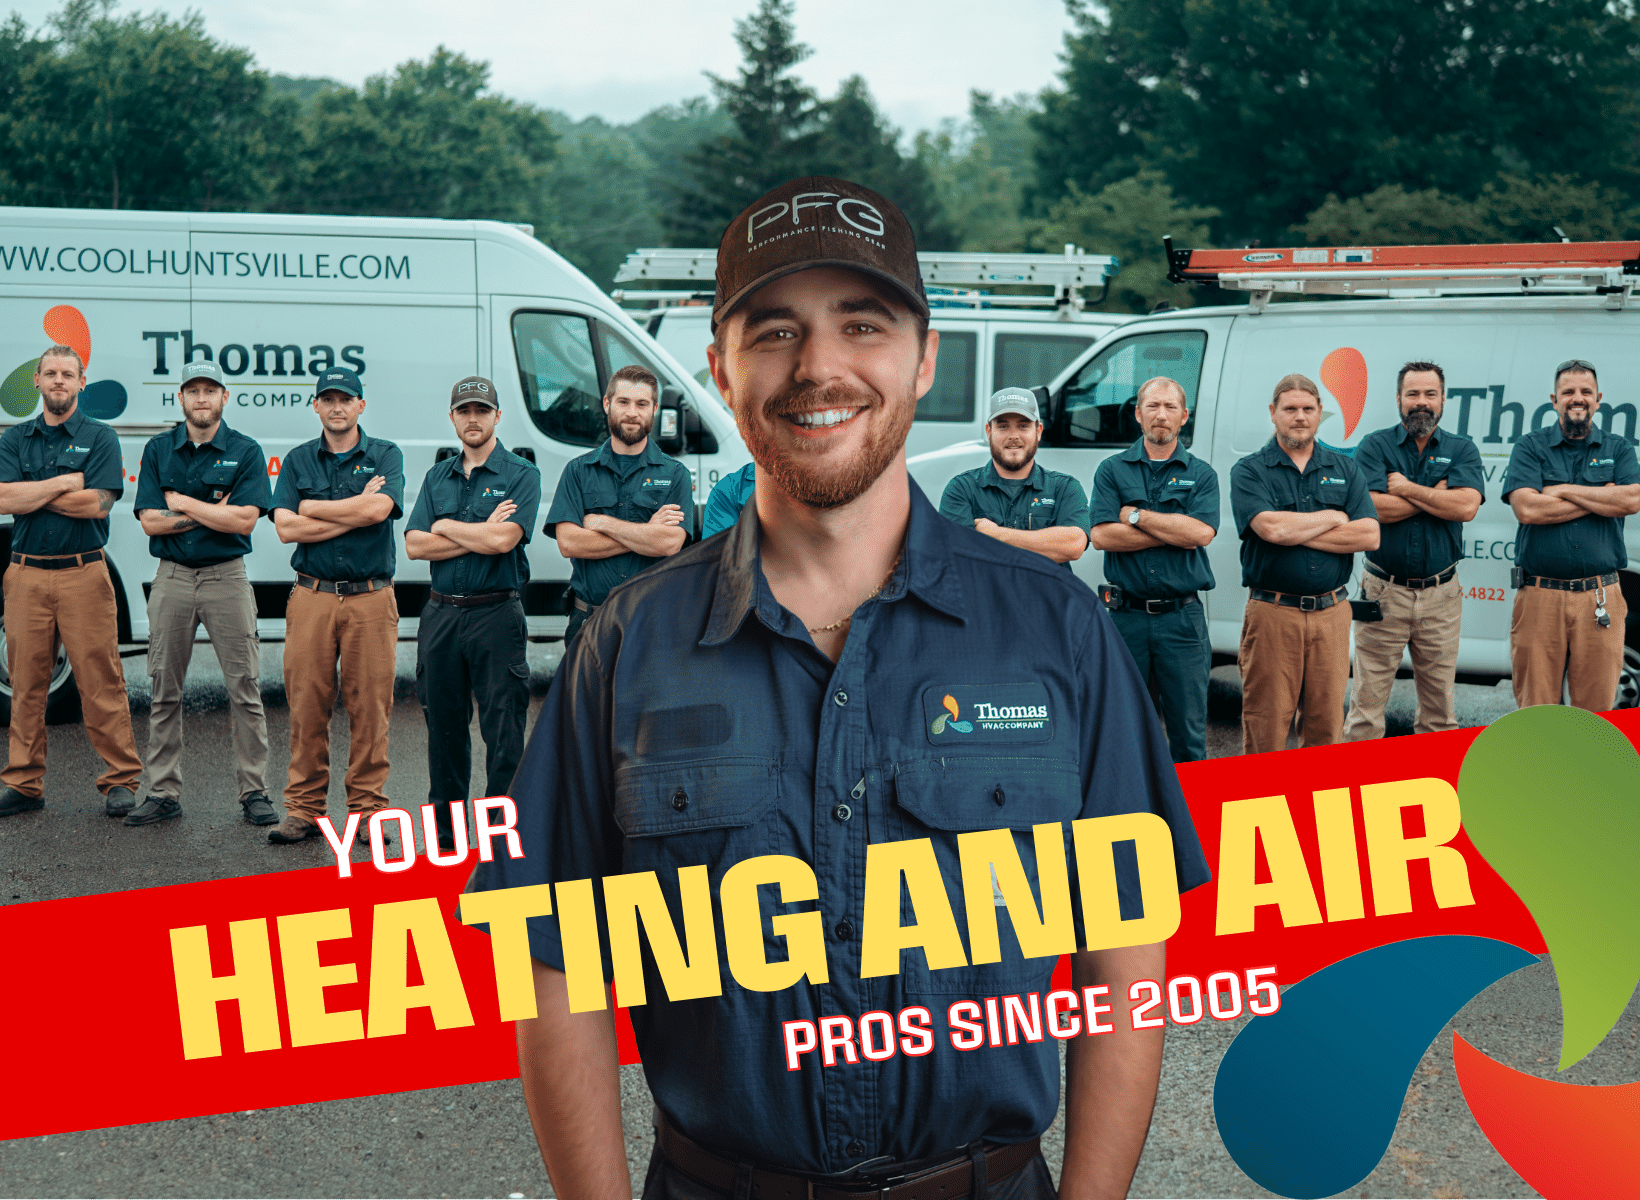 Thomas Service Company: Your Heating and Air Pros Since 2005